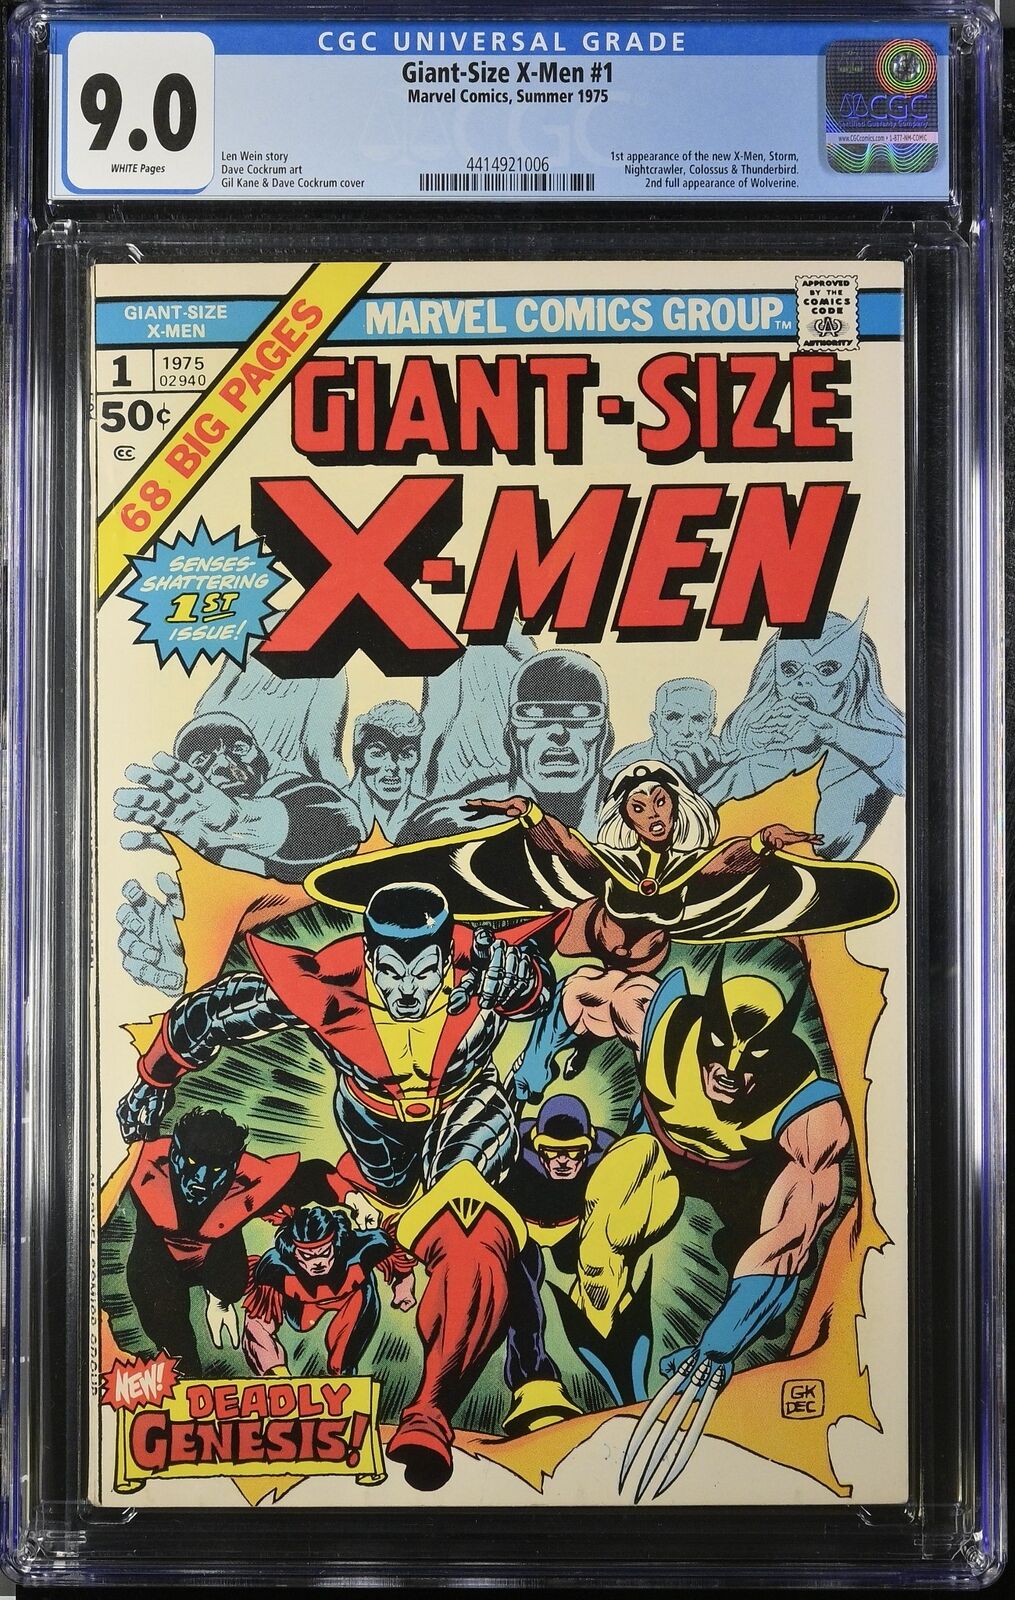 Giant-Size X-Men #1 CGC 9.0 White Pages